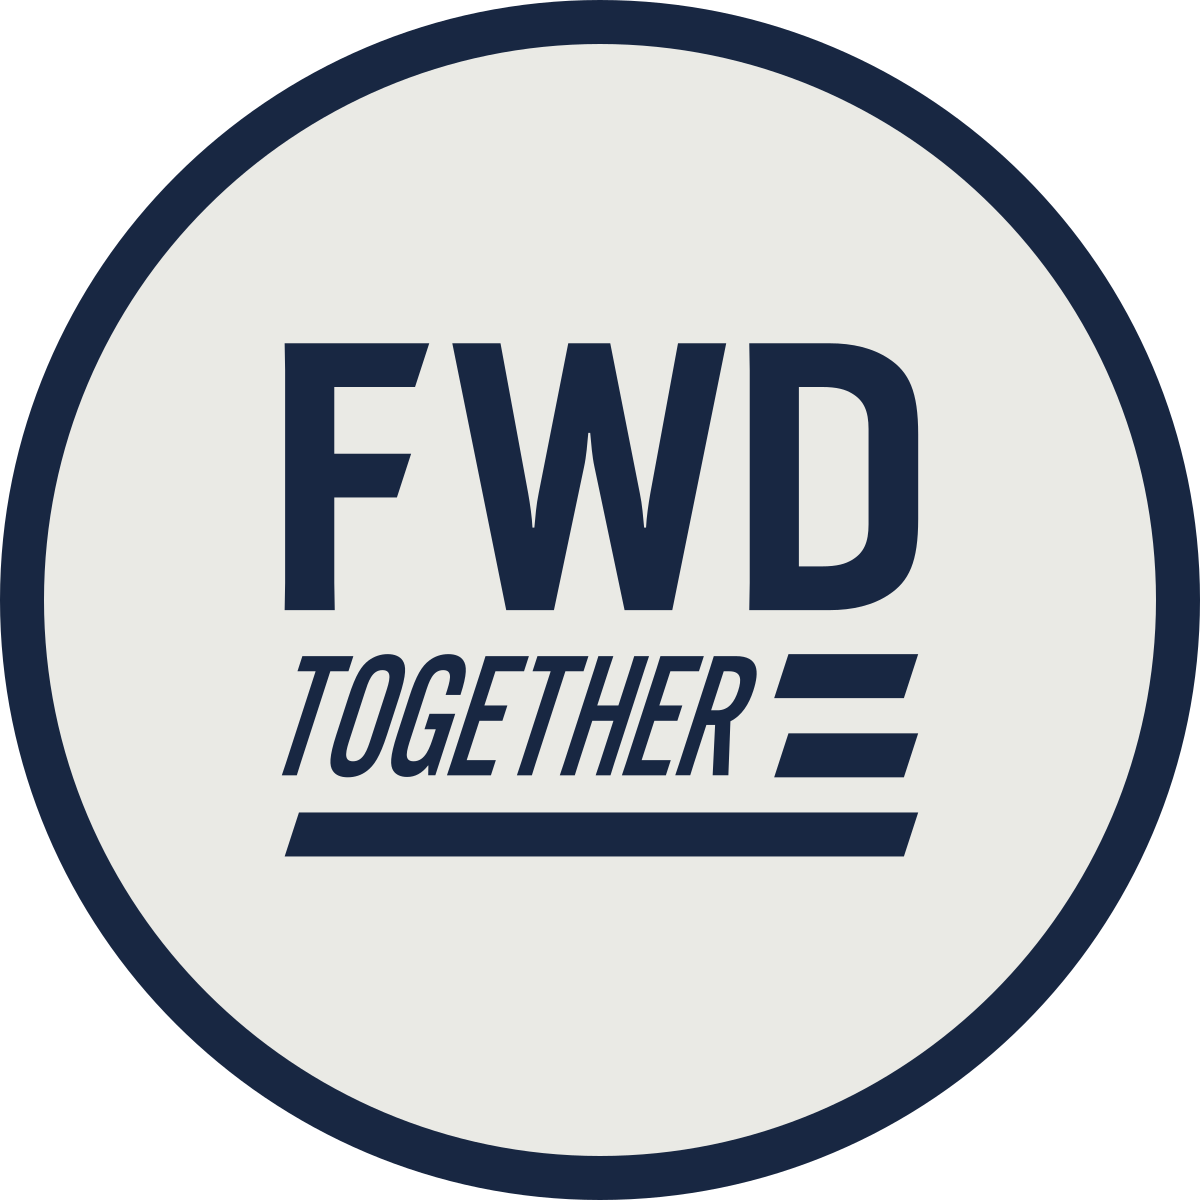 About Us - Forward Together Colorado